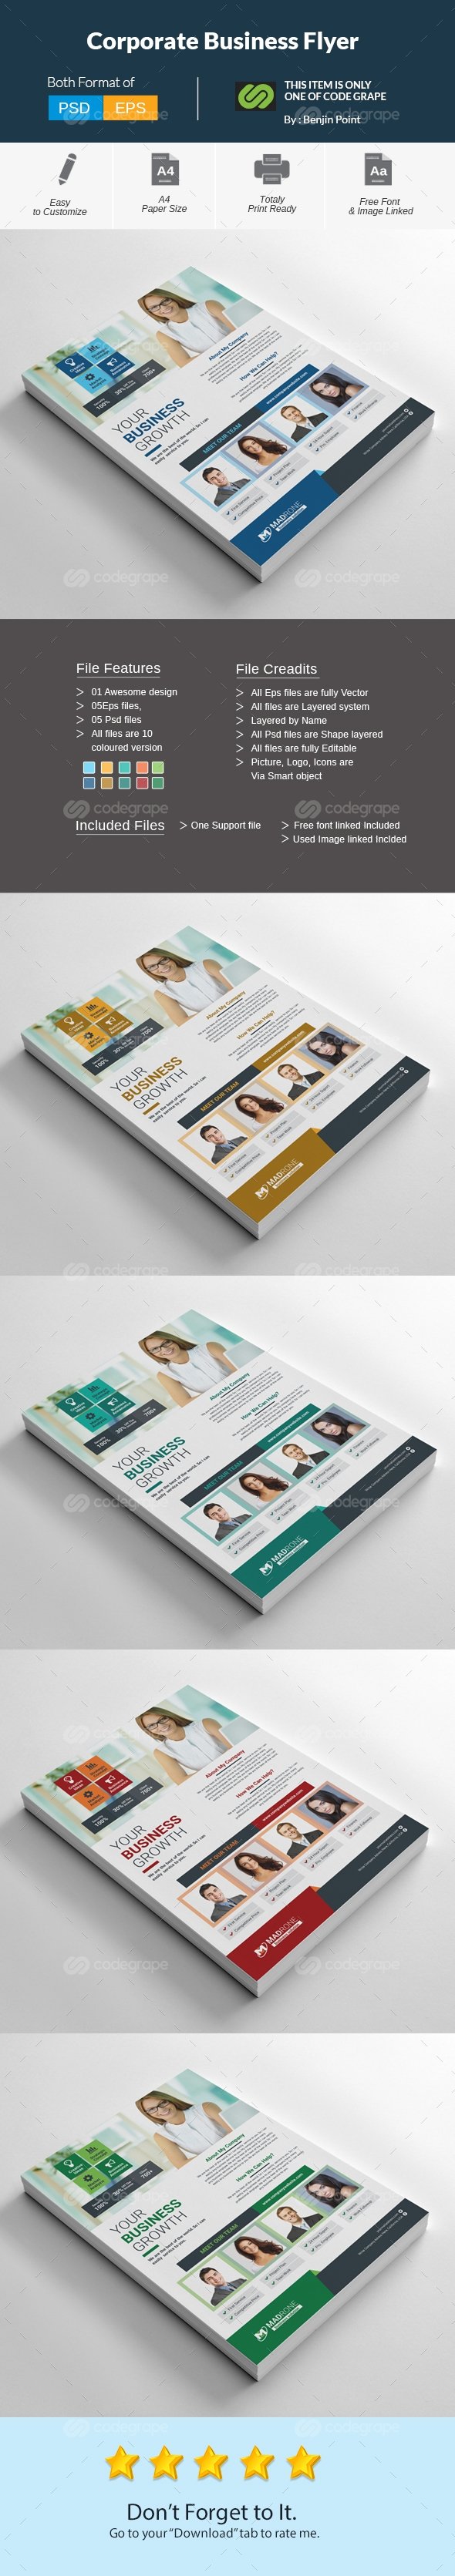 codegrape-9831-corporate-business-flyer